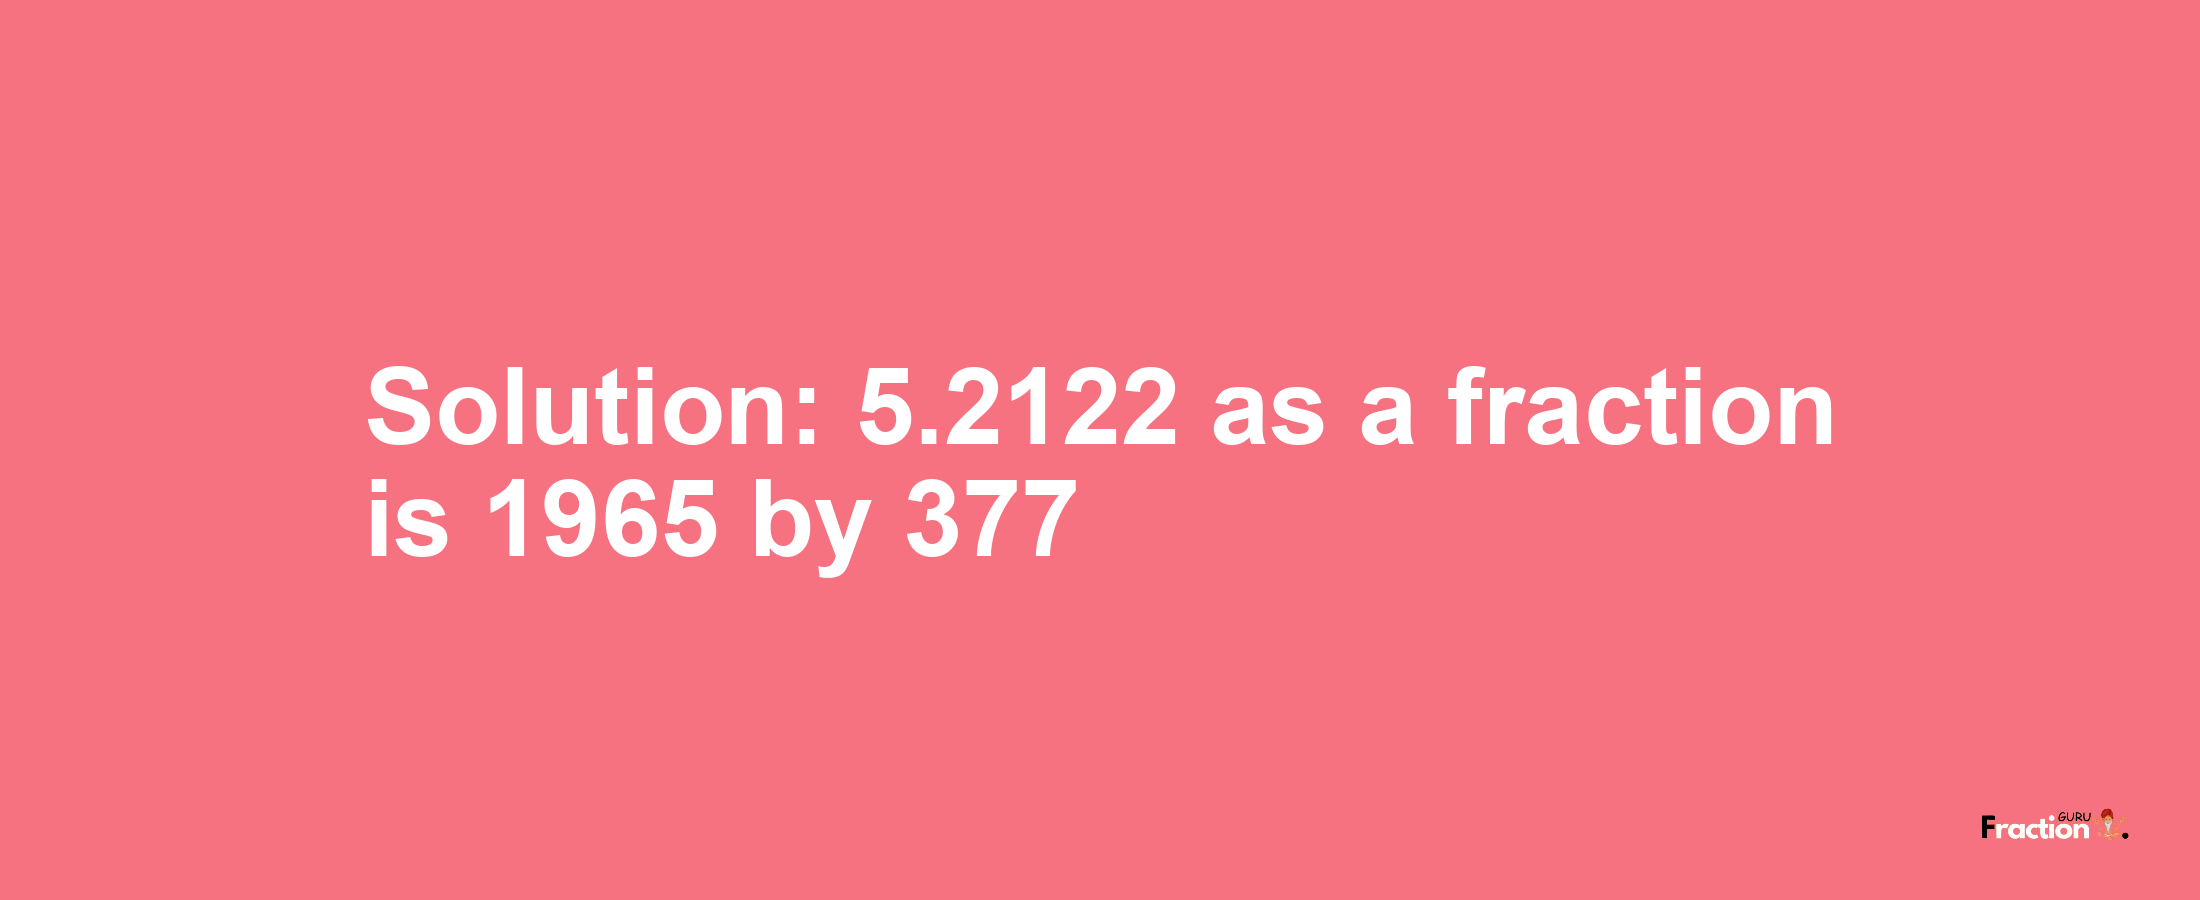 Solution:5.2122 as a fraction is 1965/377